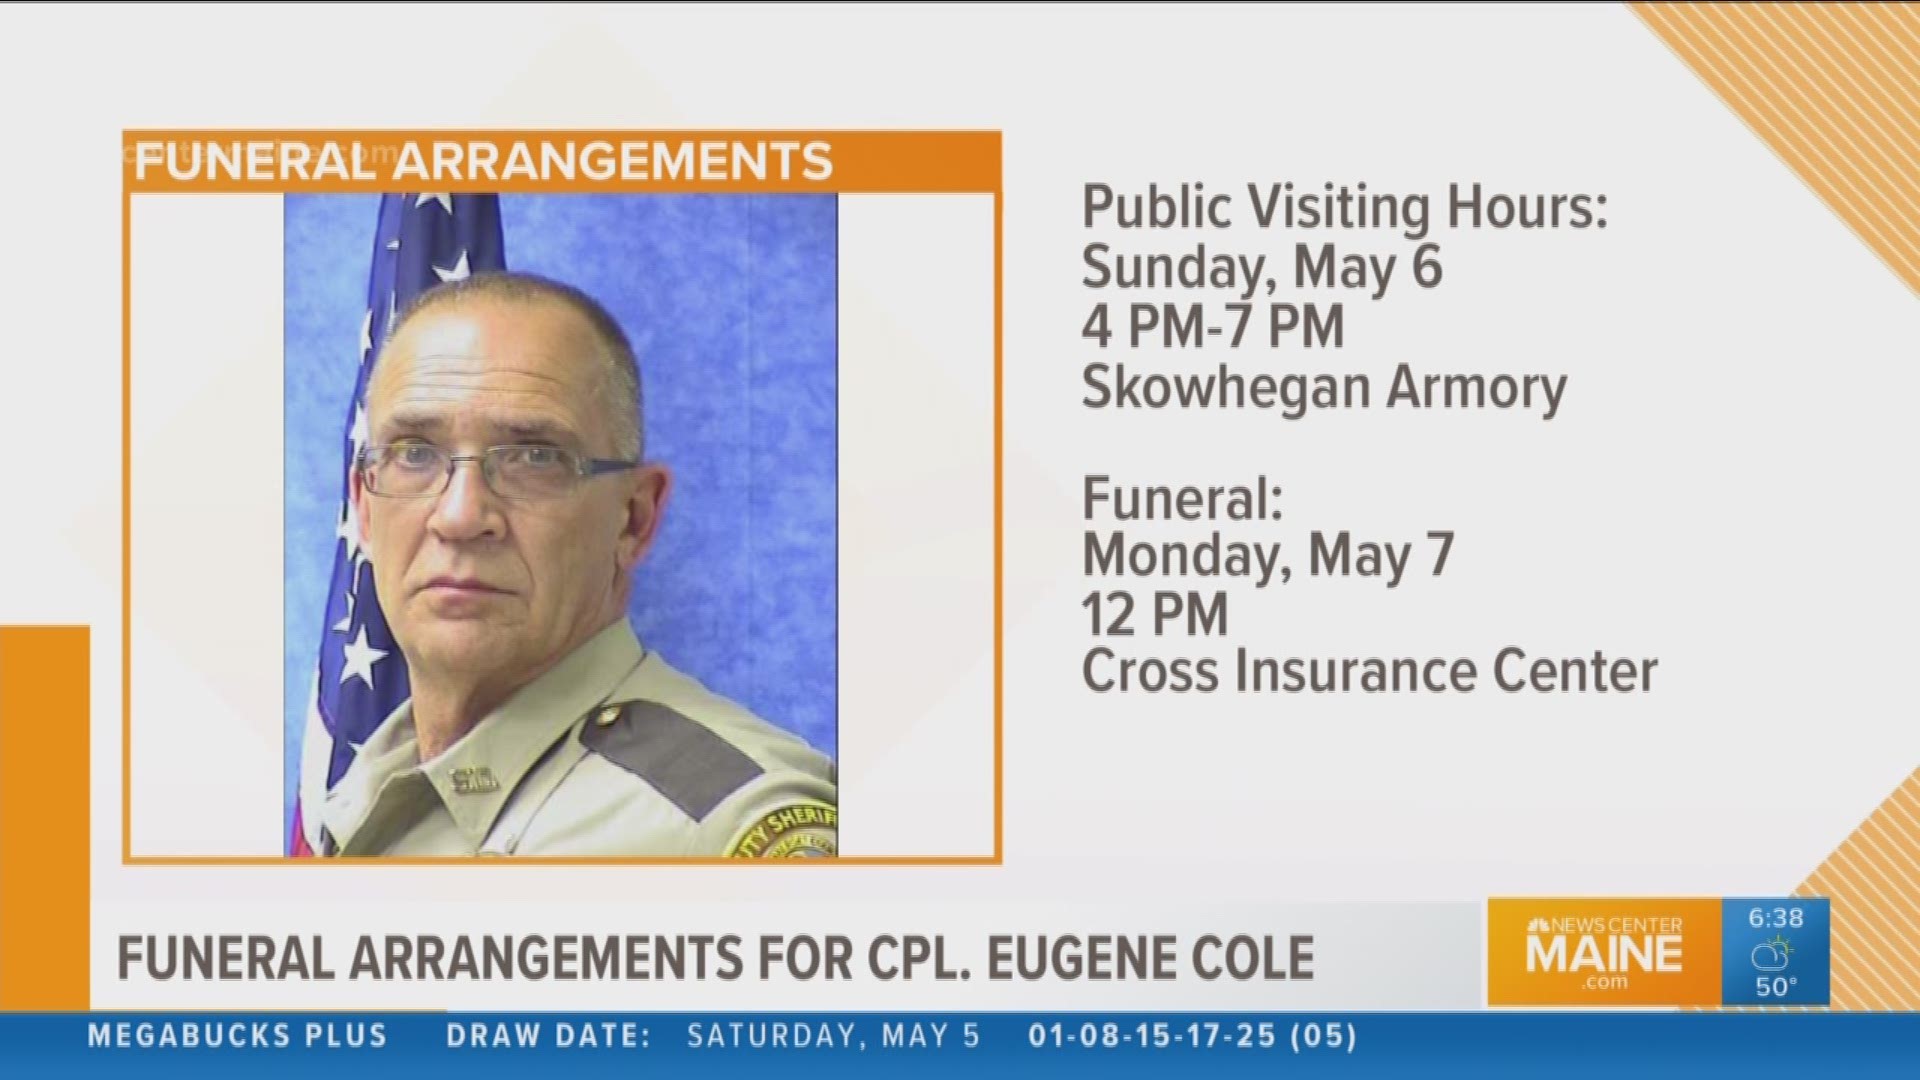 Visiting and funeral info for Cpl Cole